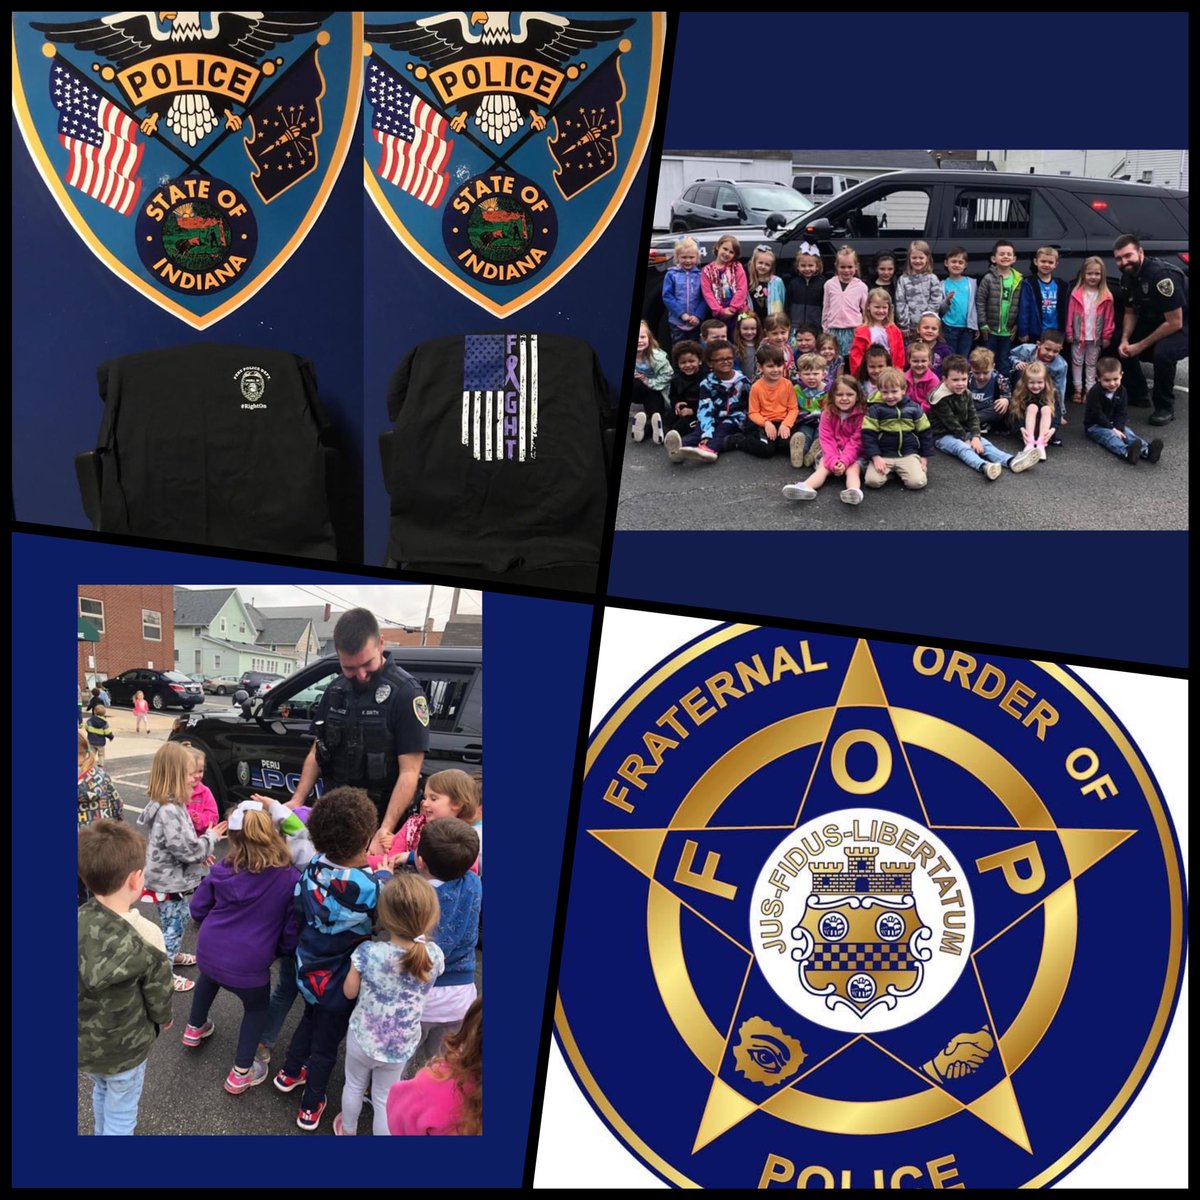 Peru Police Officer Keith Smith talking with preschoolers at MainStreet PreSchool, Peru, Indiana. #bestofthebest @PeruPd @NatPoliceAssoc @GLFOP @IndianaLawEnfo1 @BackTheLEOs #indiana @LawEnforceToday @IndStatePolice #LawEnforcement https://t.co/MbQK3q09YI